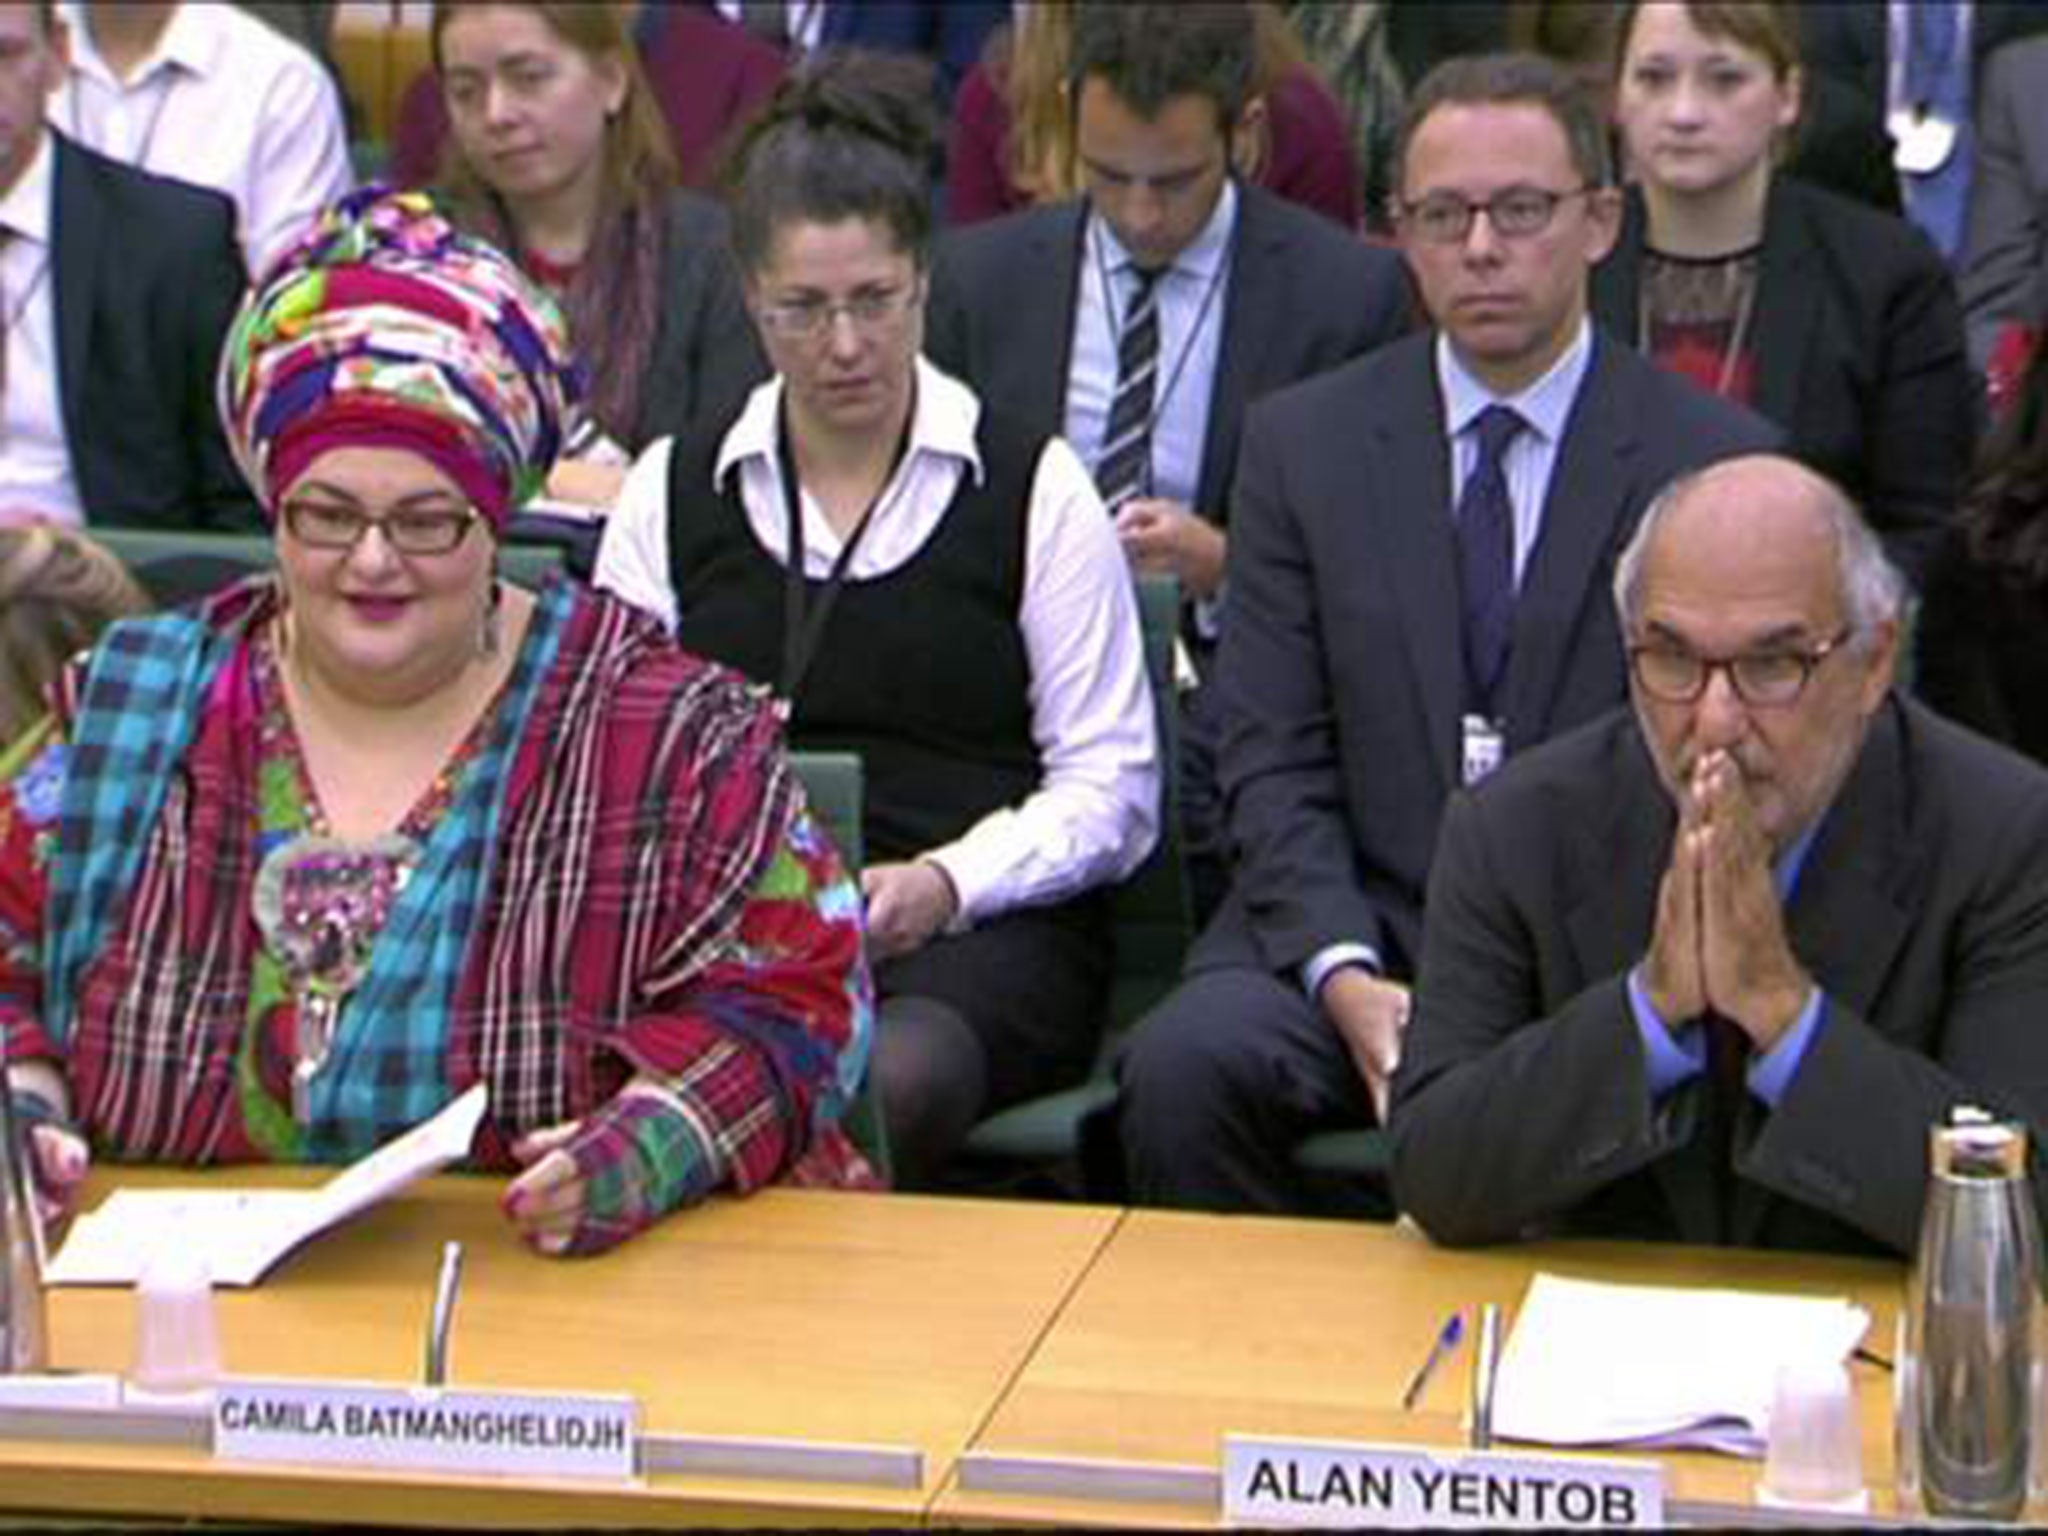 Camila Batmanghelidjh and Alan Yentob were questioned for three hours by MPs.